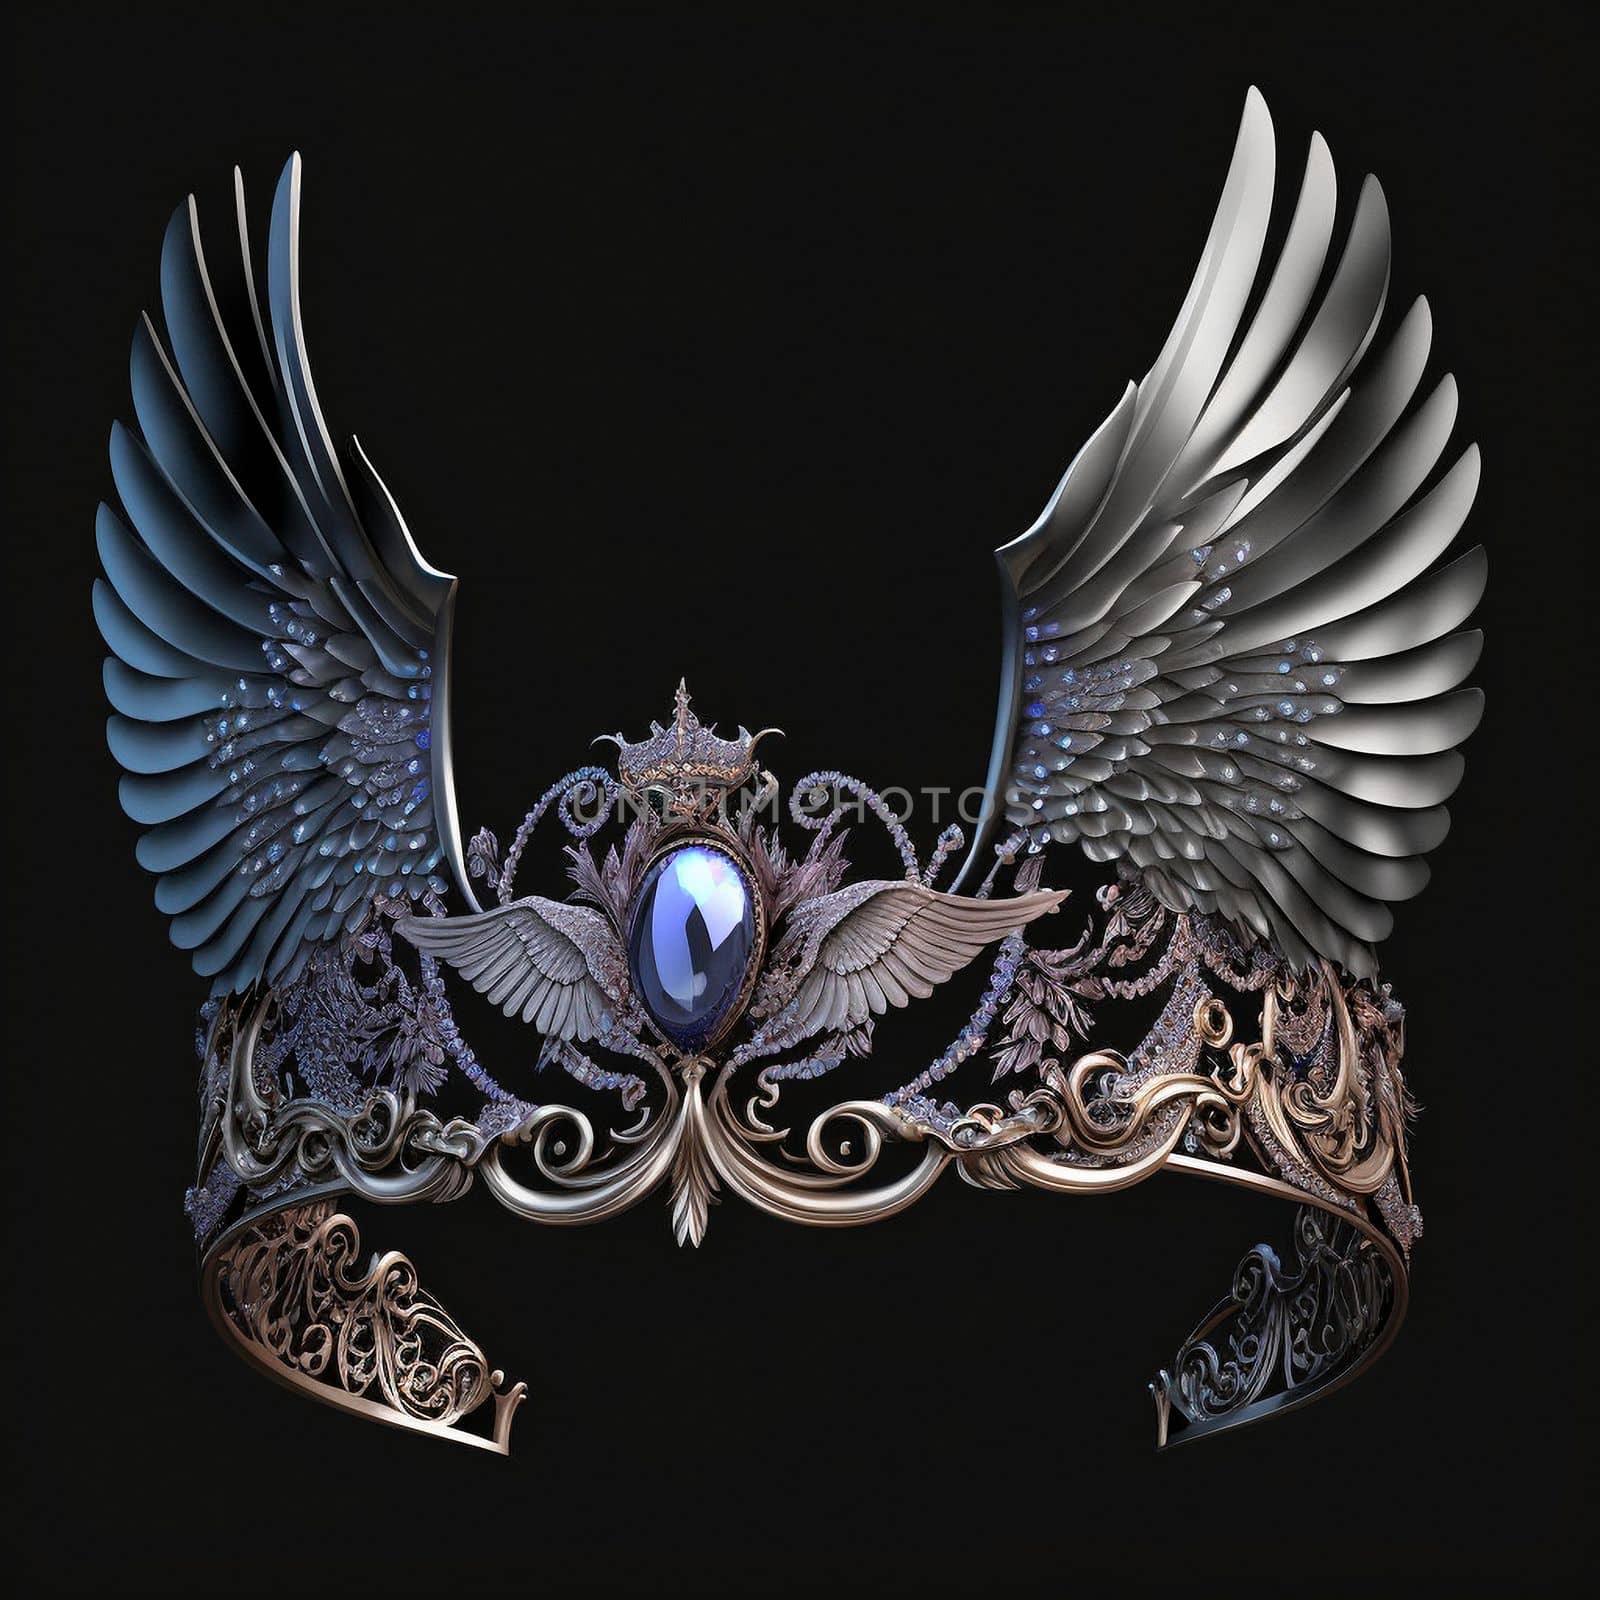 Tiara with wings by NeuroSky